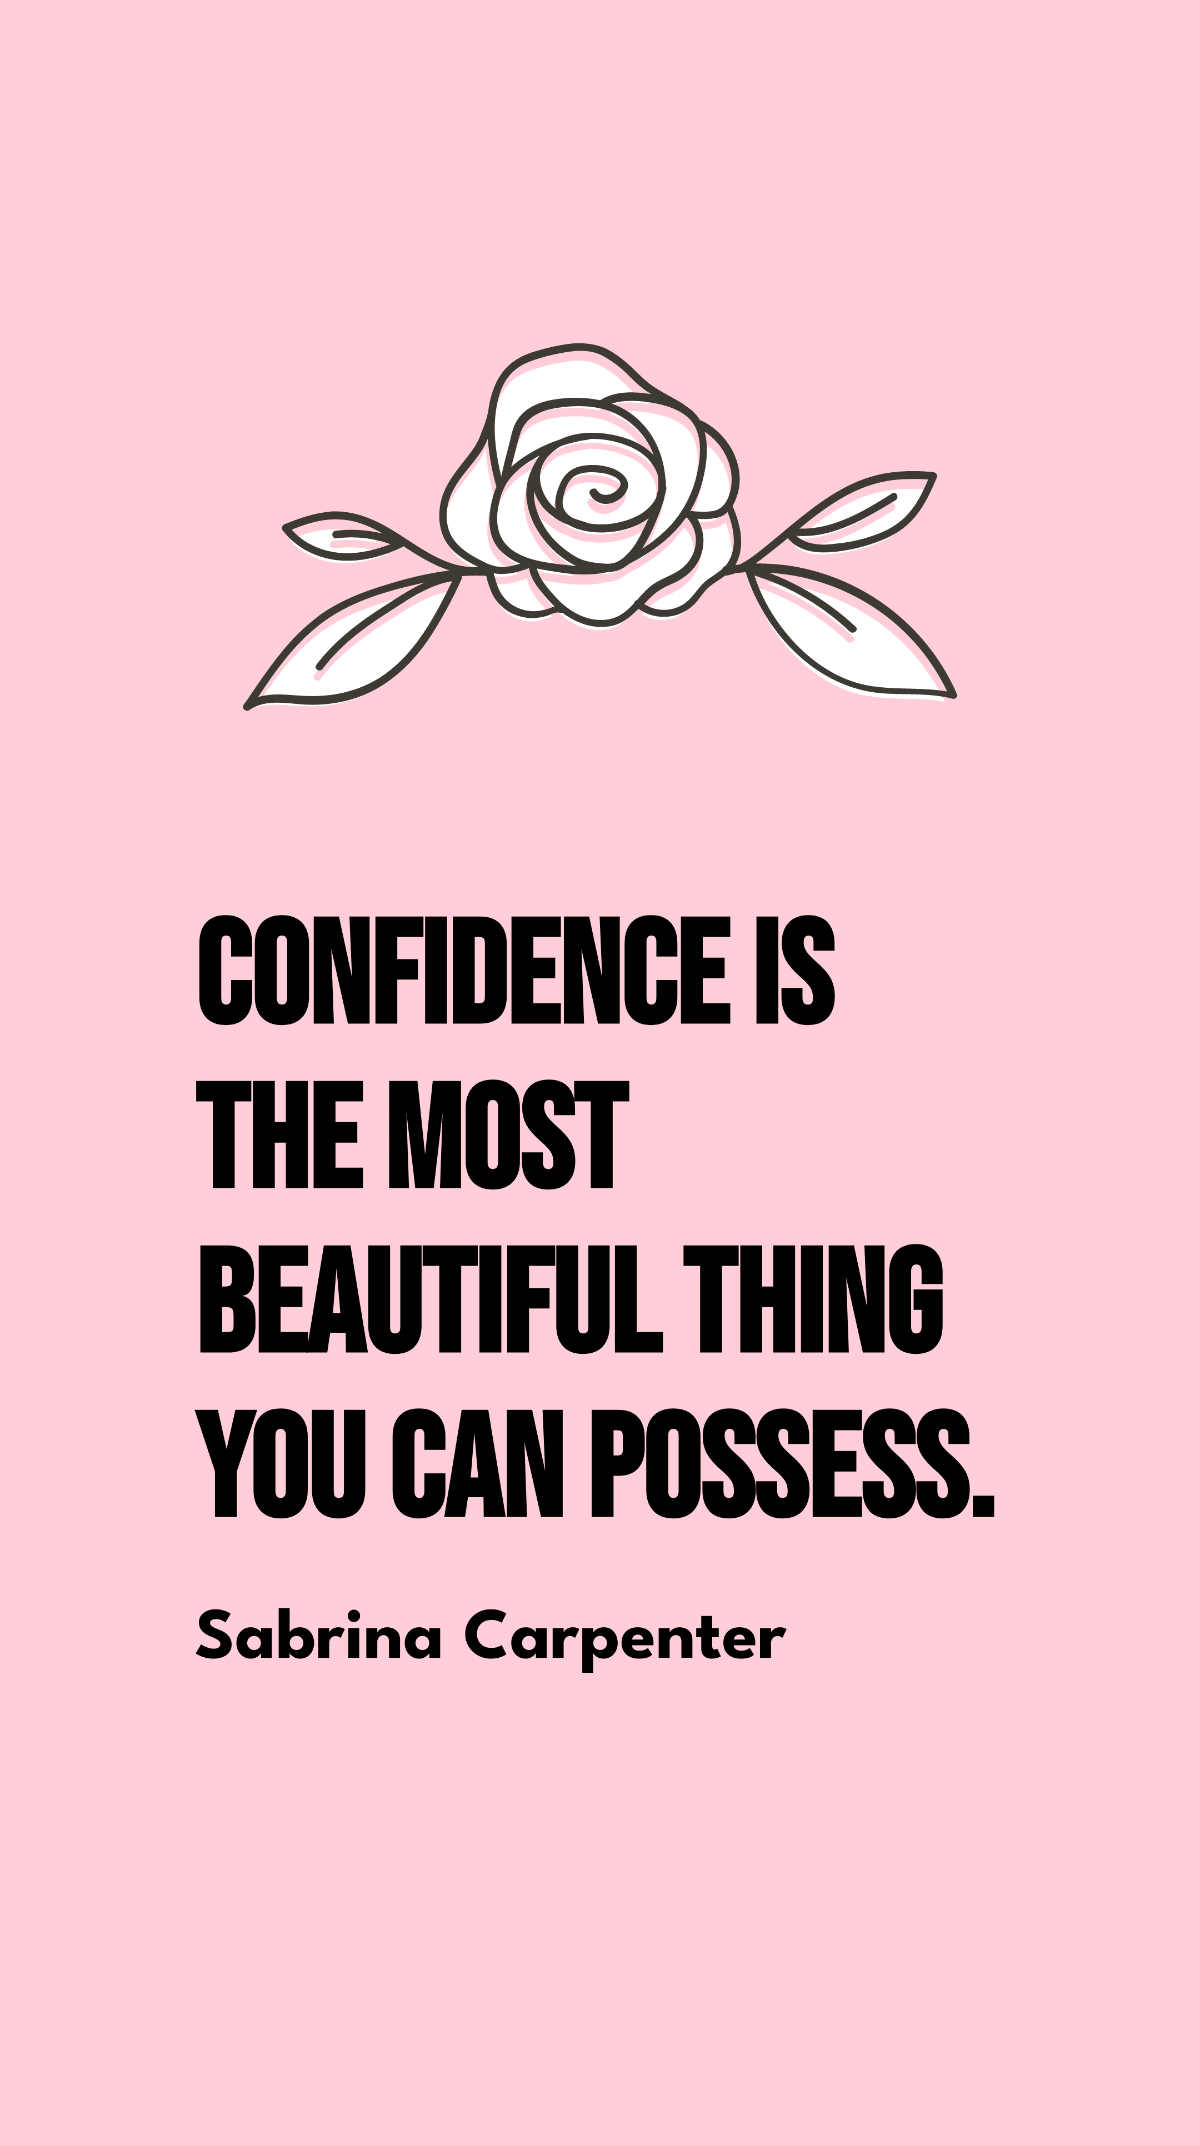 Sabrina Carpenter - Confidence is the most beautiful thing you can possess. Template